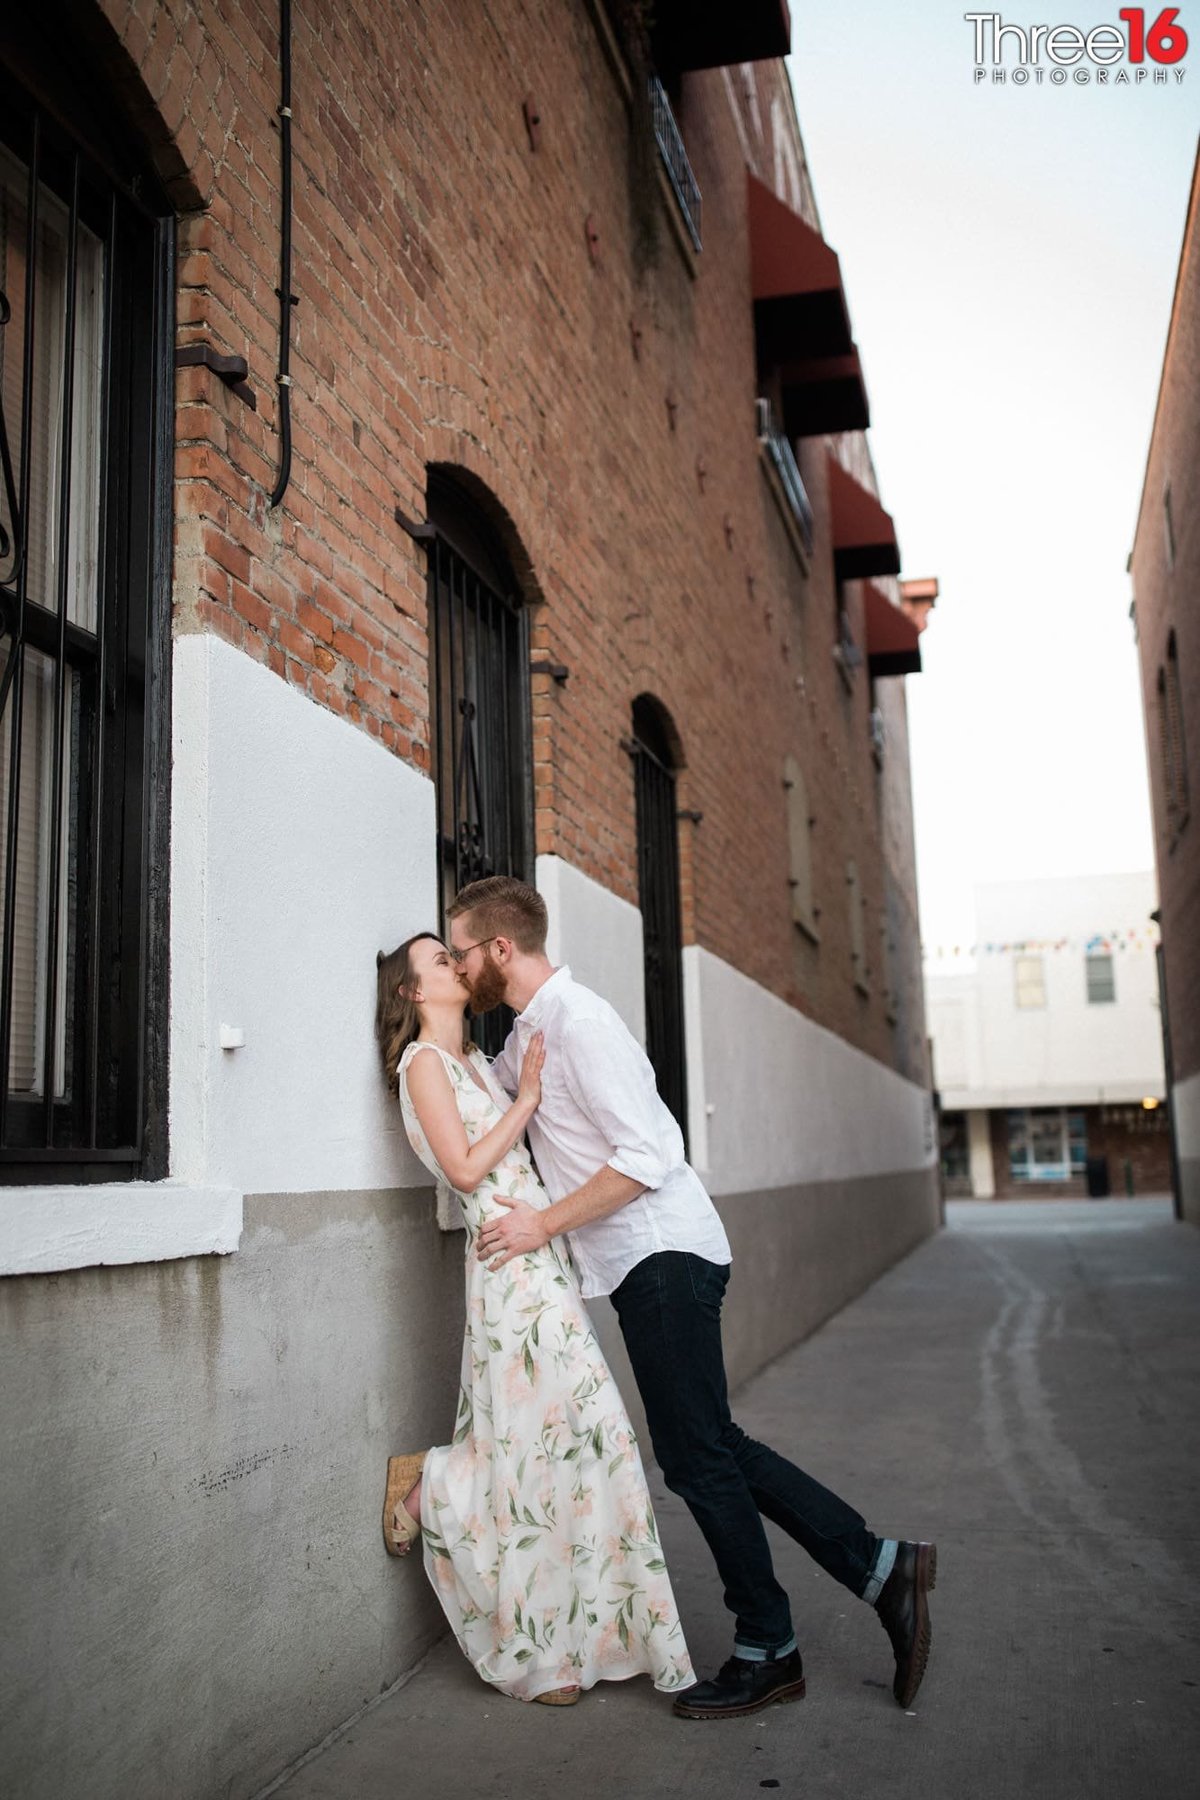 Groom to be leans into a kiss as his Bride is against a brick wall